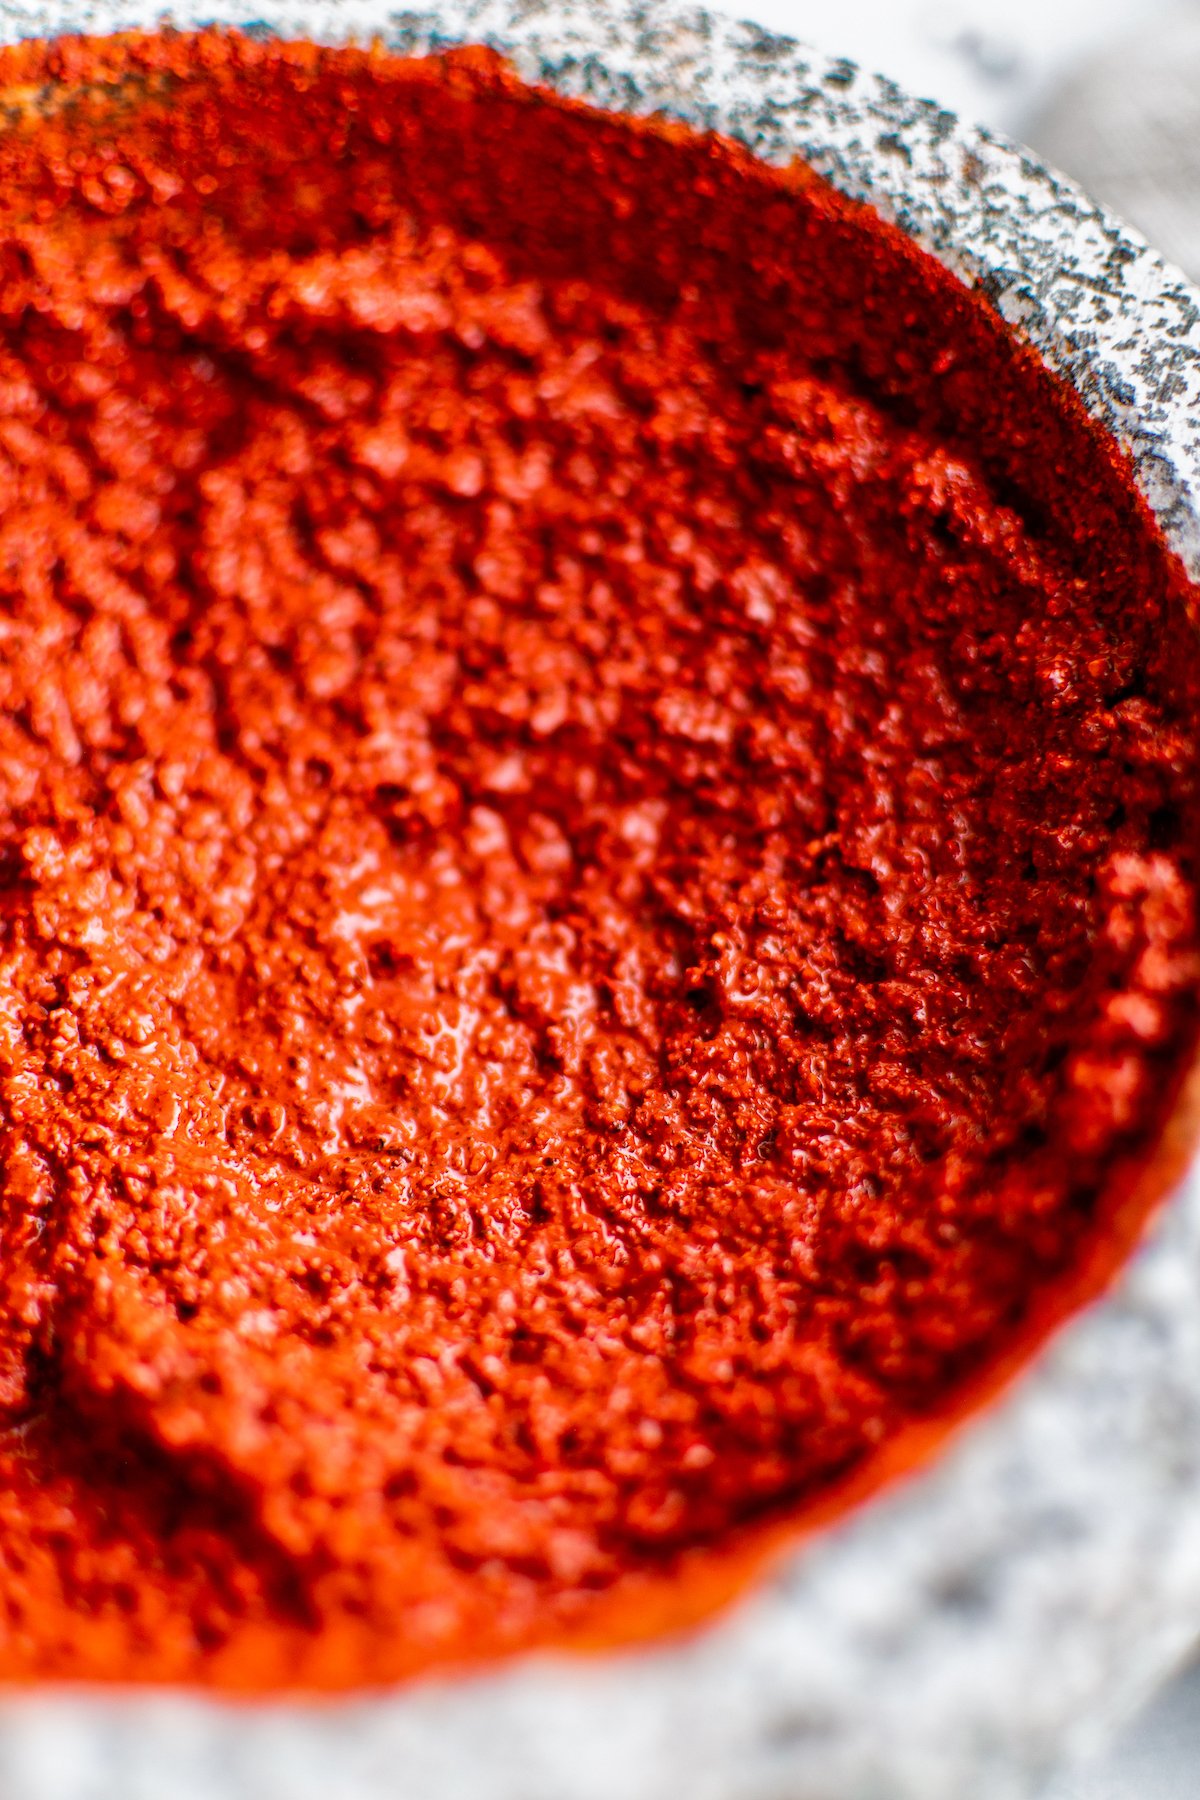 A bright red spice-based meat rub in a mortar and pestle